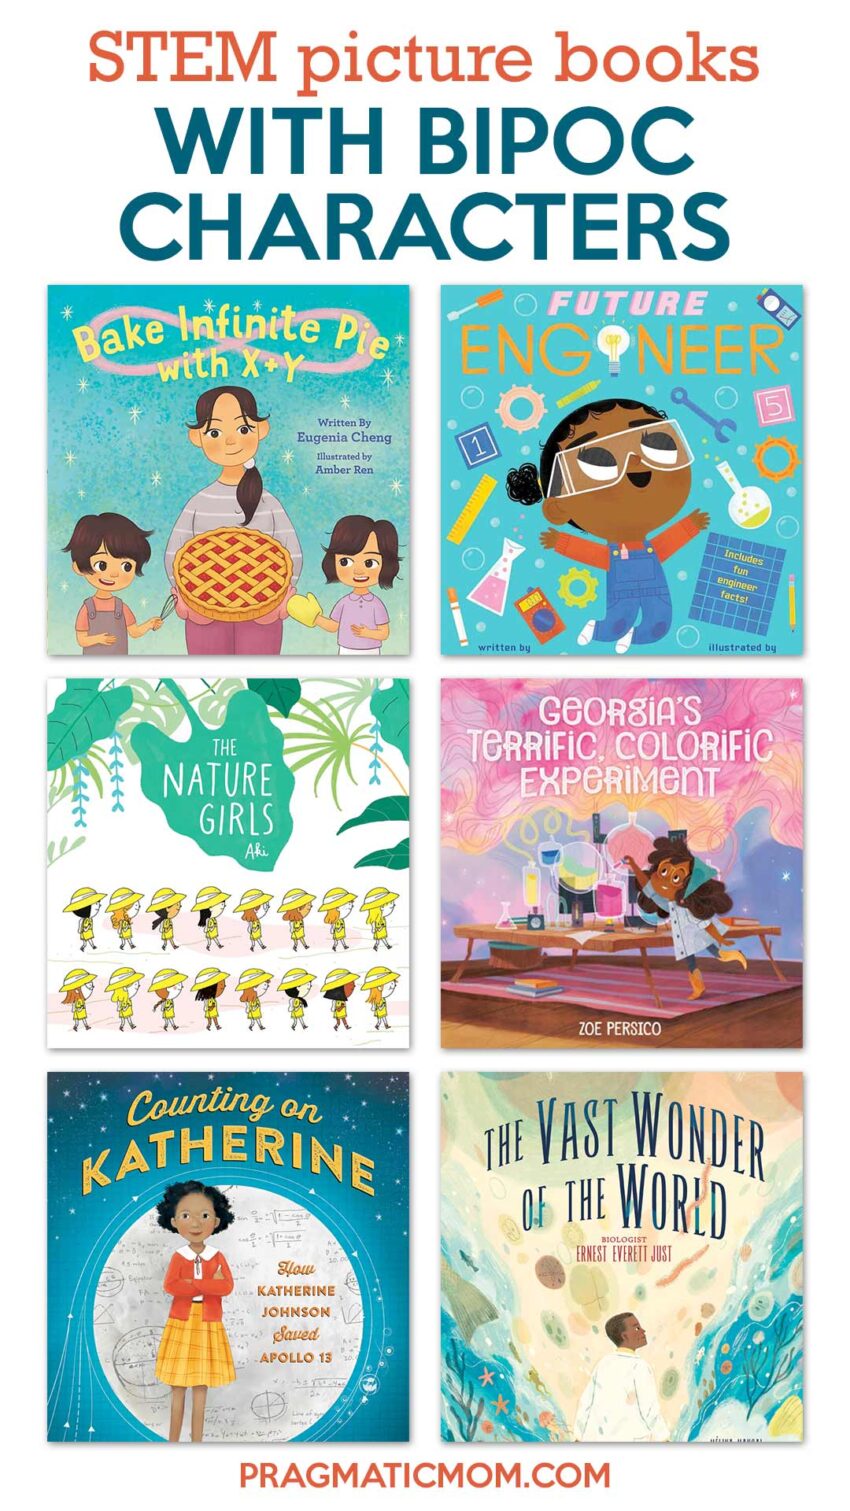 STEM Picture Books with BIPOC Characters